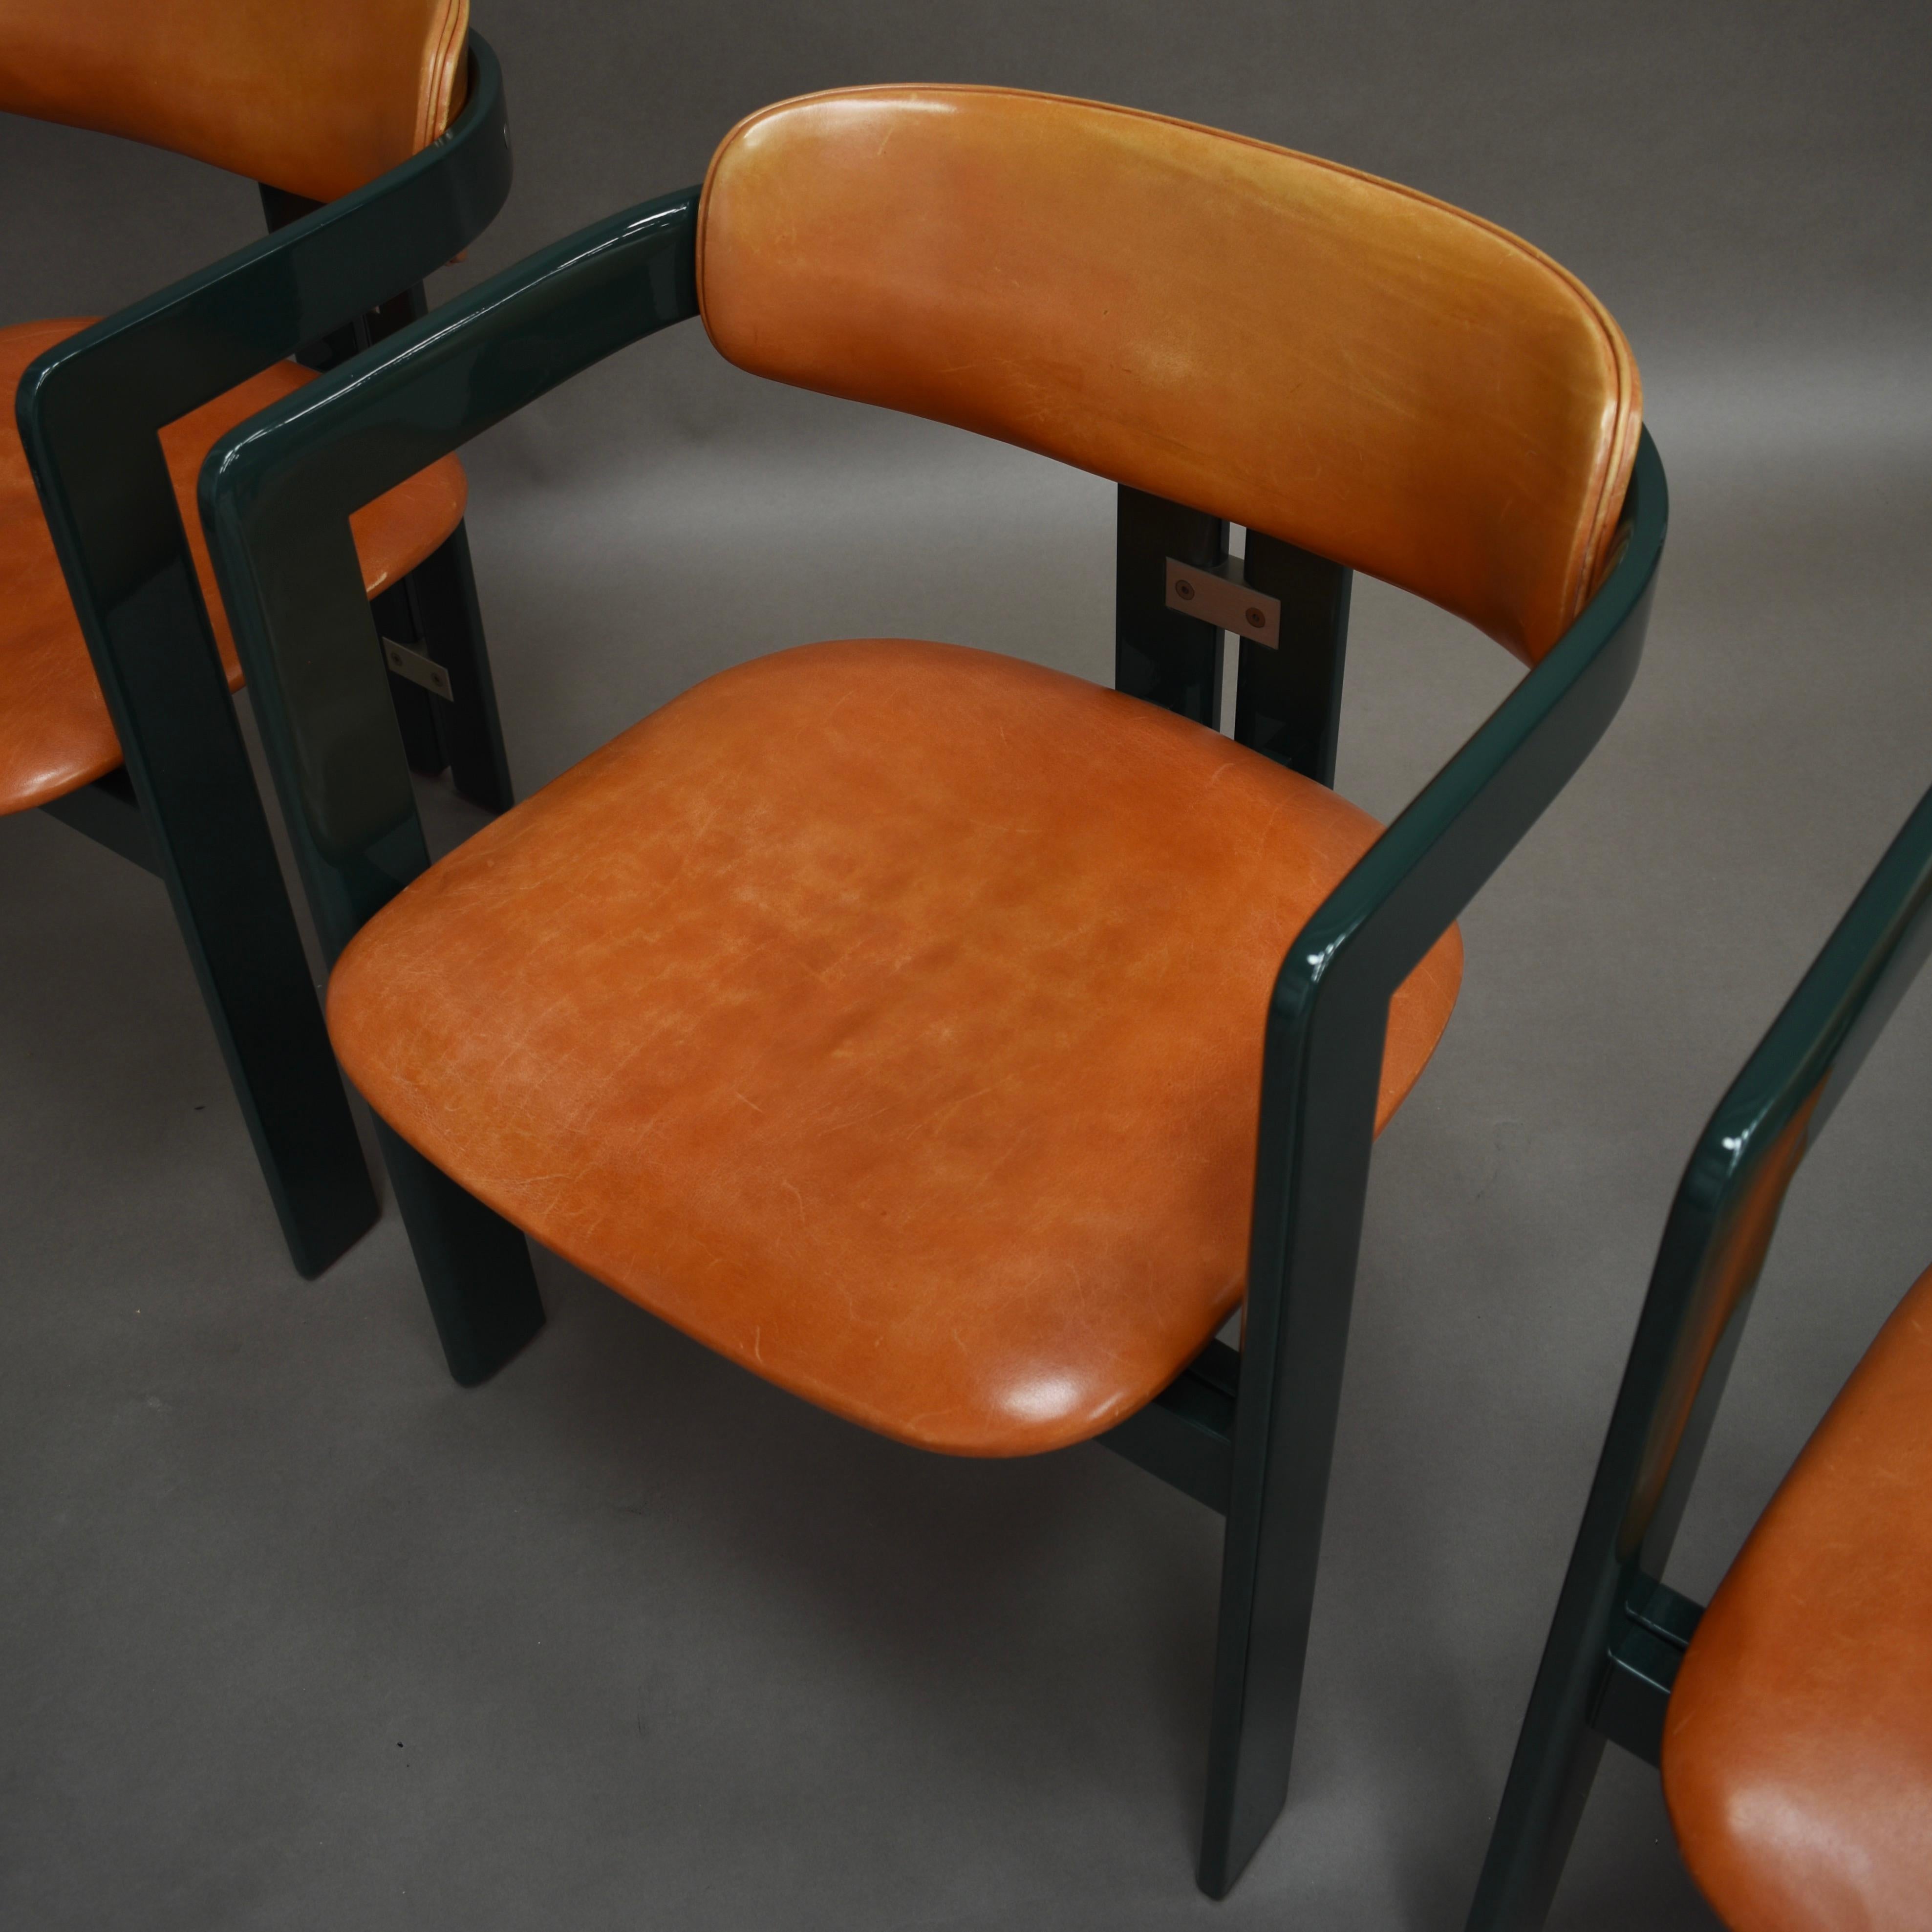 Aluminum Pamplona Chairs by Augusti Savini in Green and Tan Leather, Italy, 1965